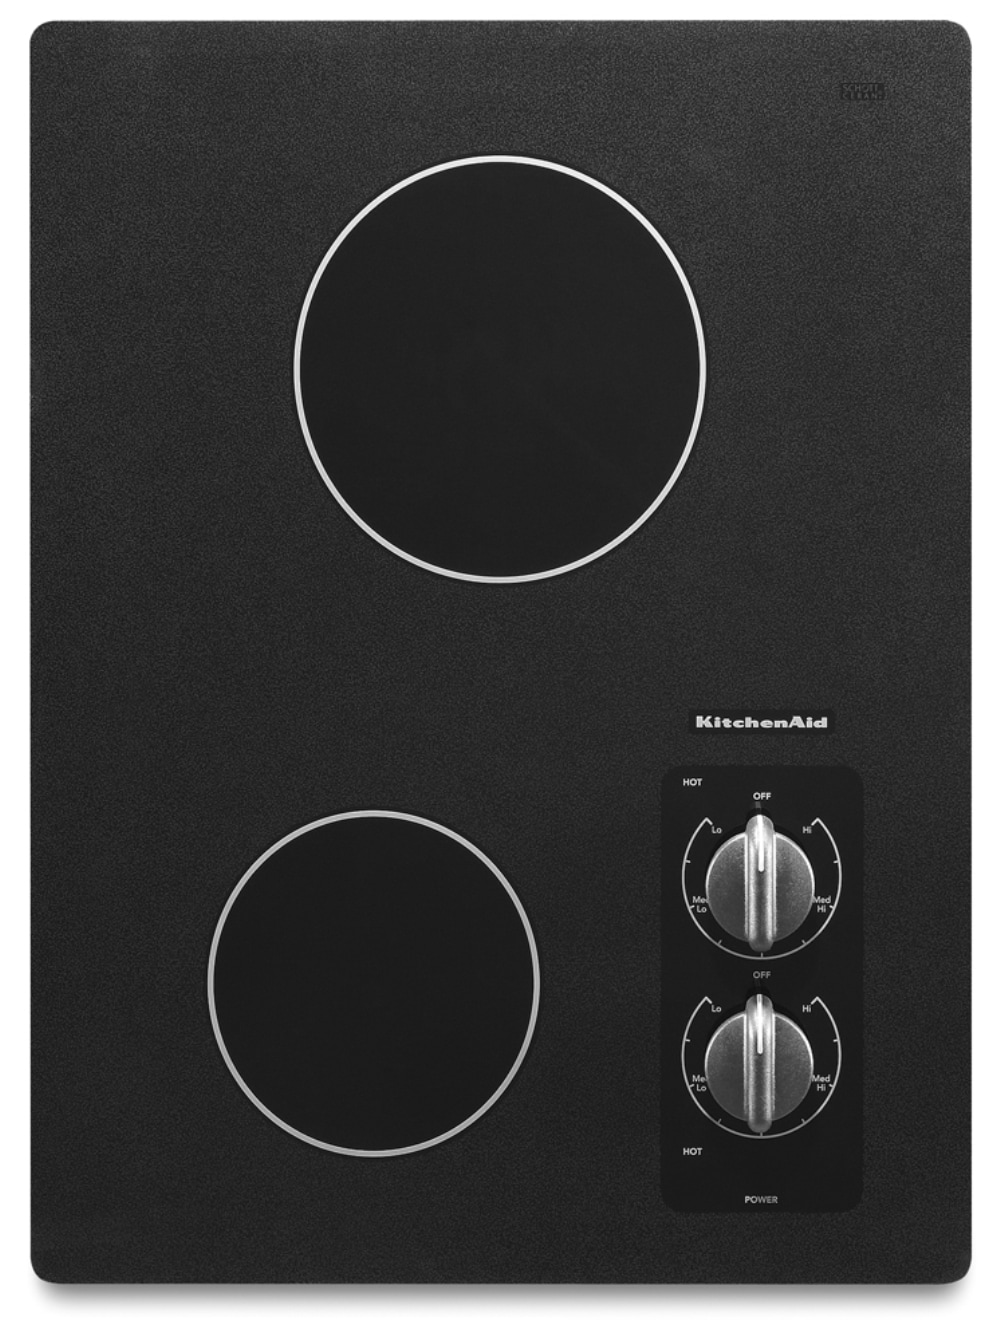 15 inch Cooktops at Lowes.com